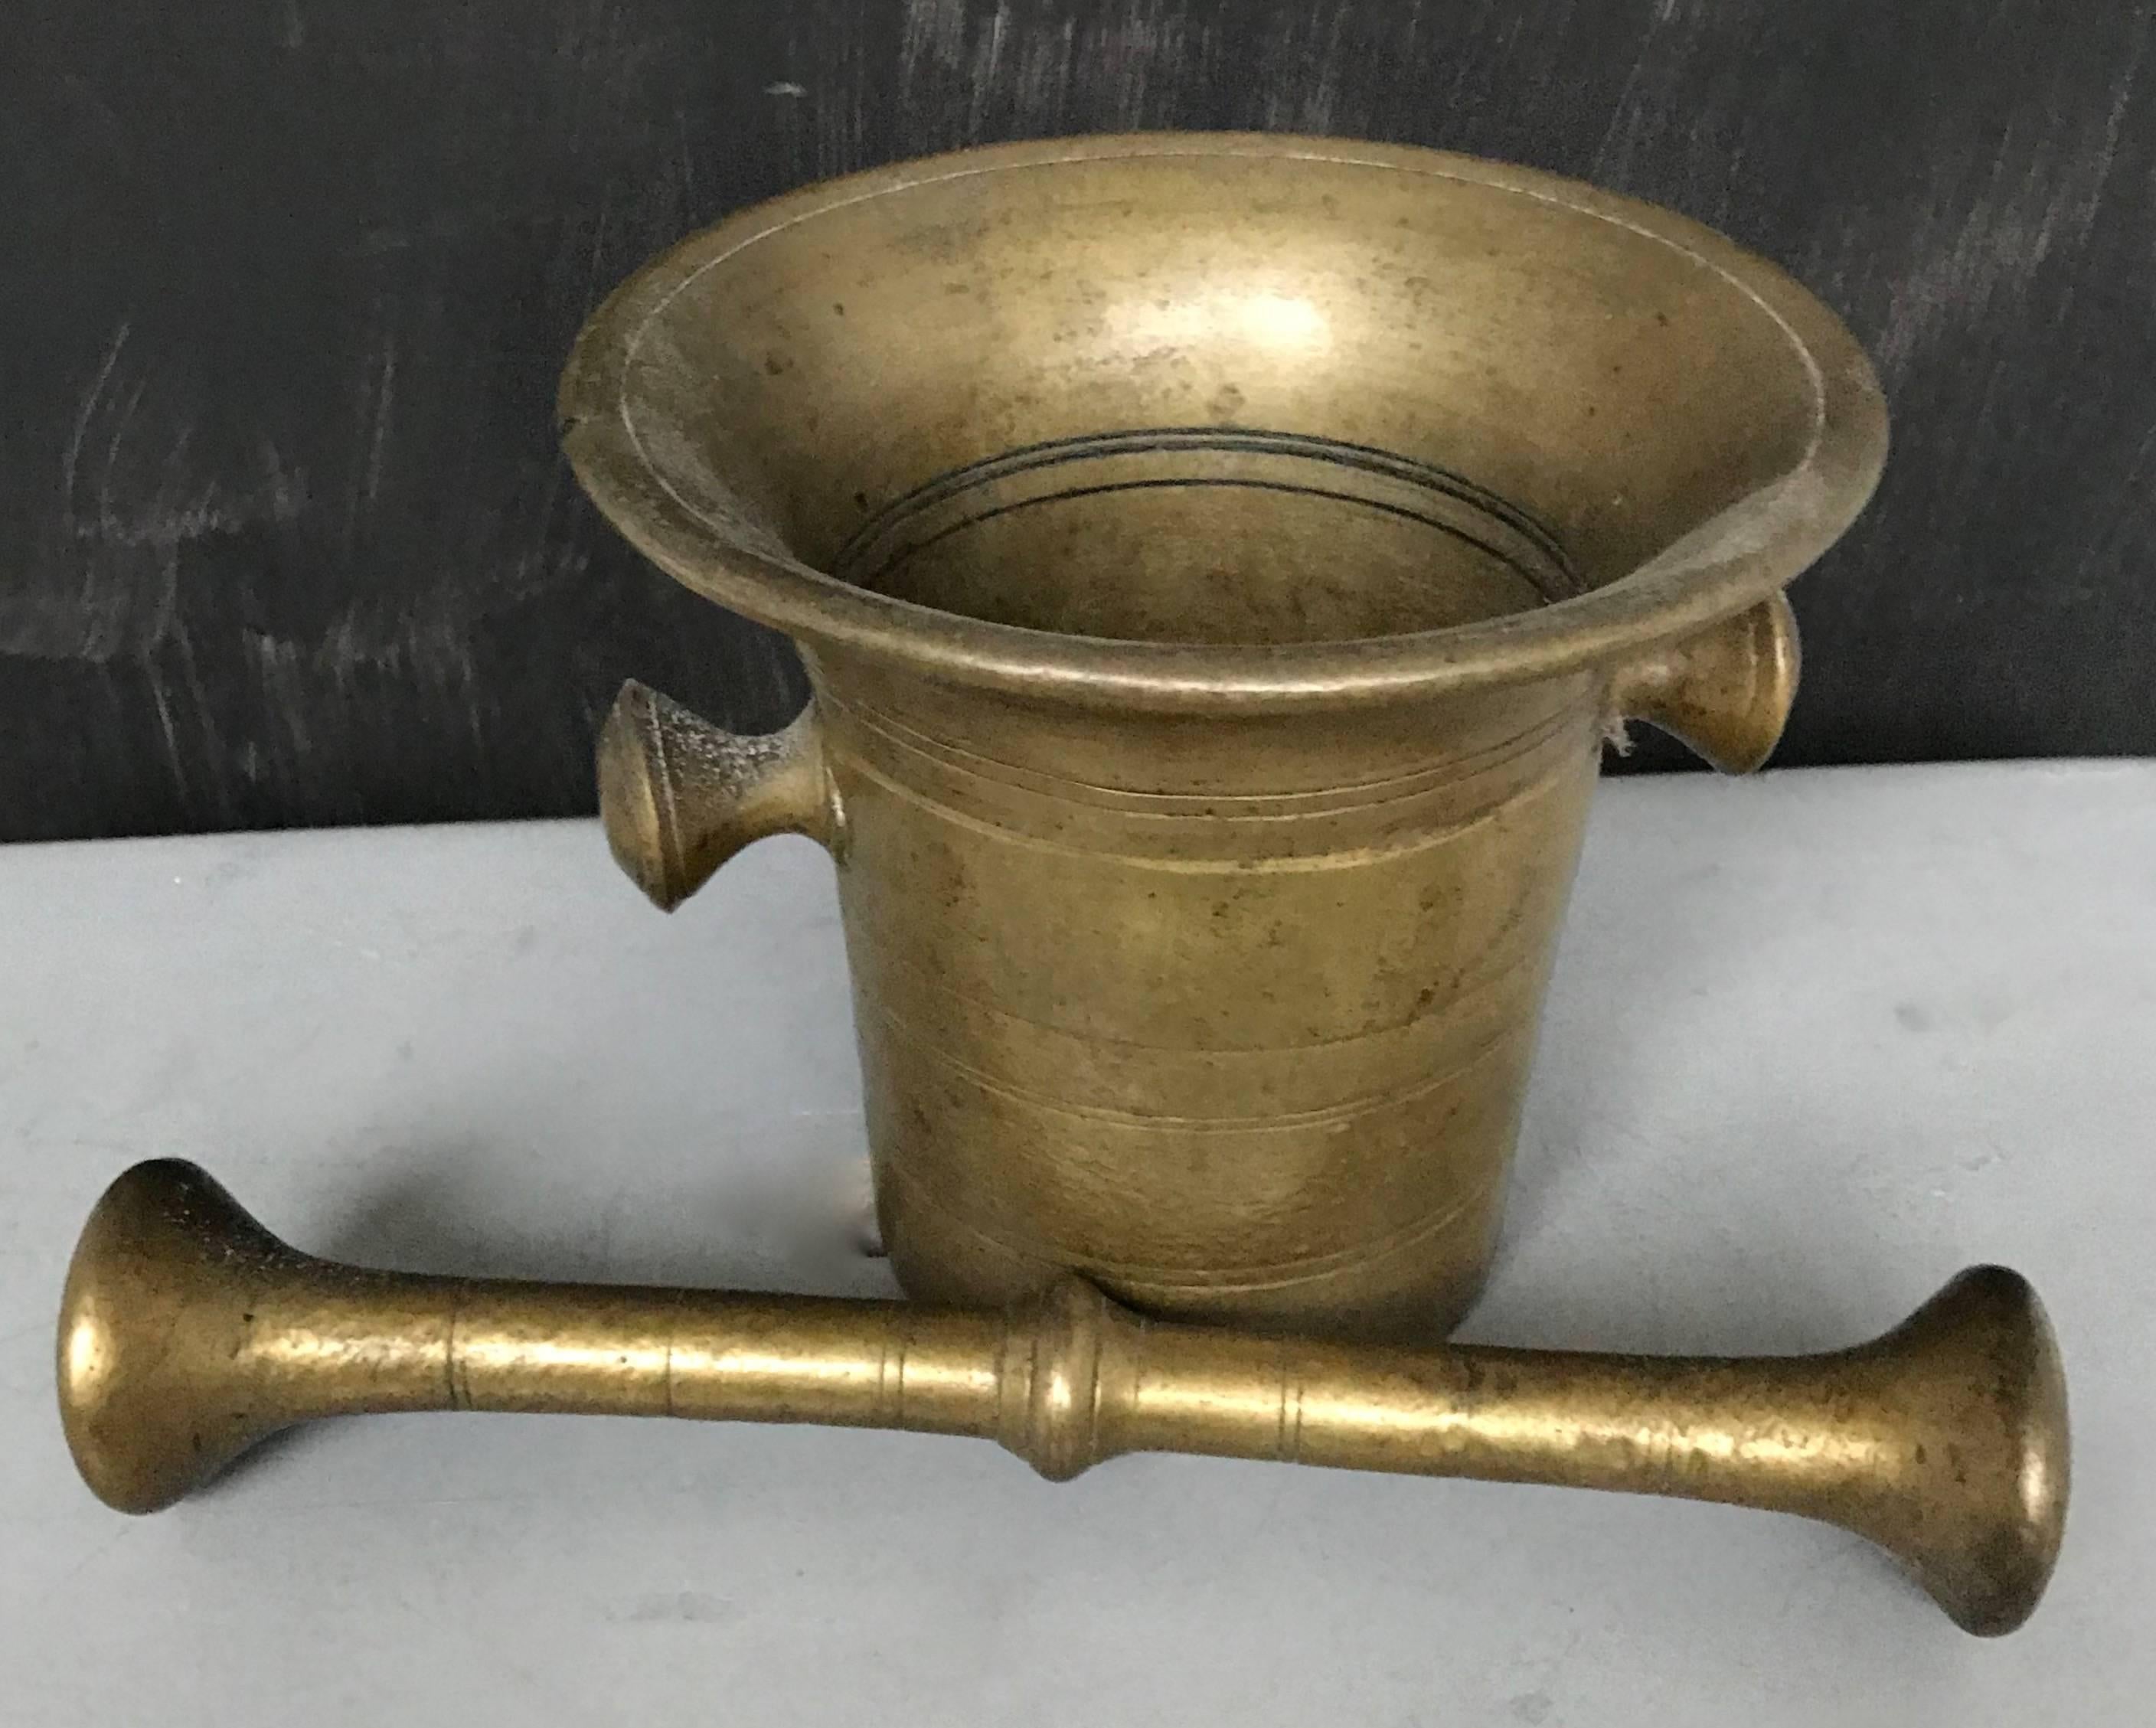 Decorative and tactile, late 18th century mortar set.

Mortars have been used for centuries by private people and by people in certain trades. In the kitchens of the 'well-to-do' they were predominantly used for 'grinding' spices and making new